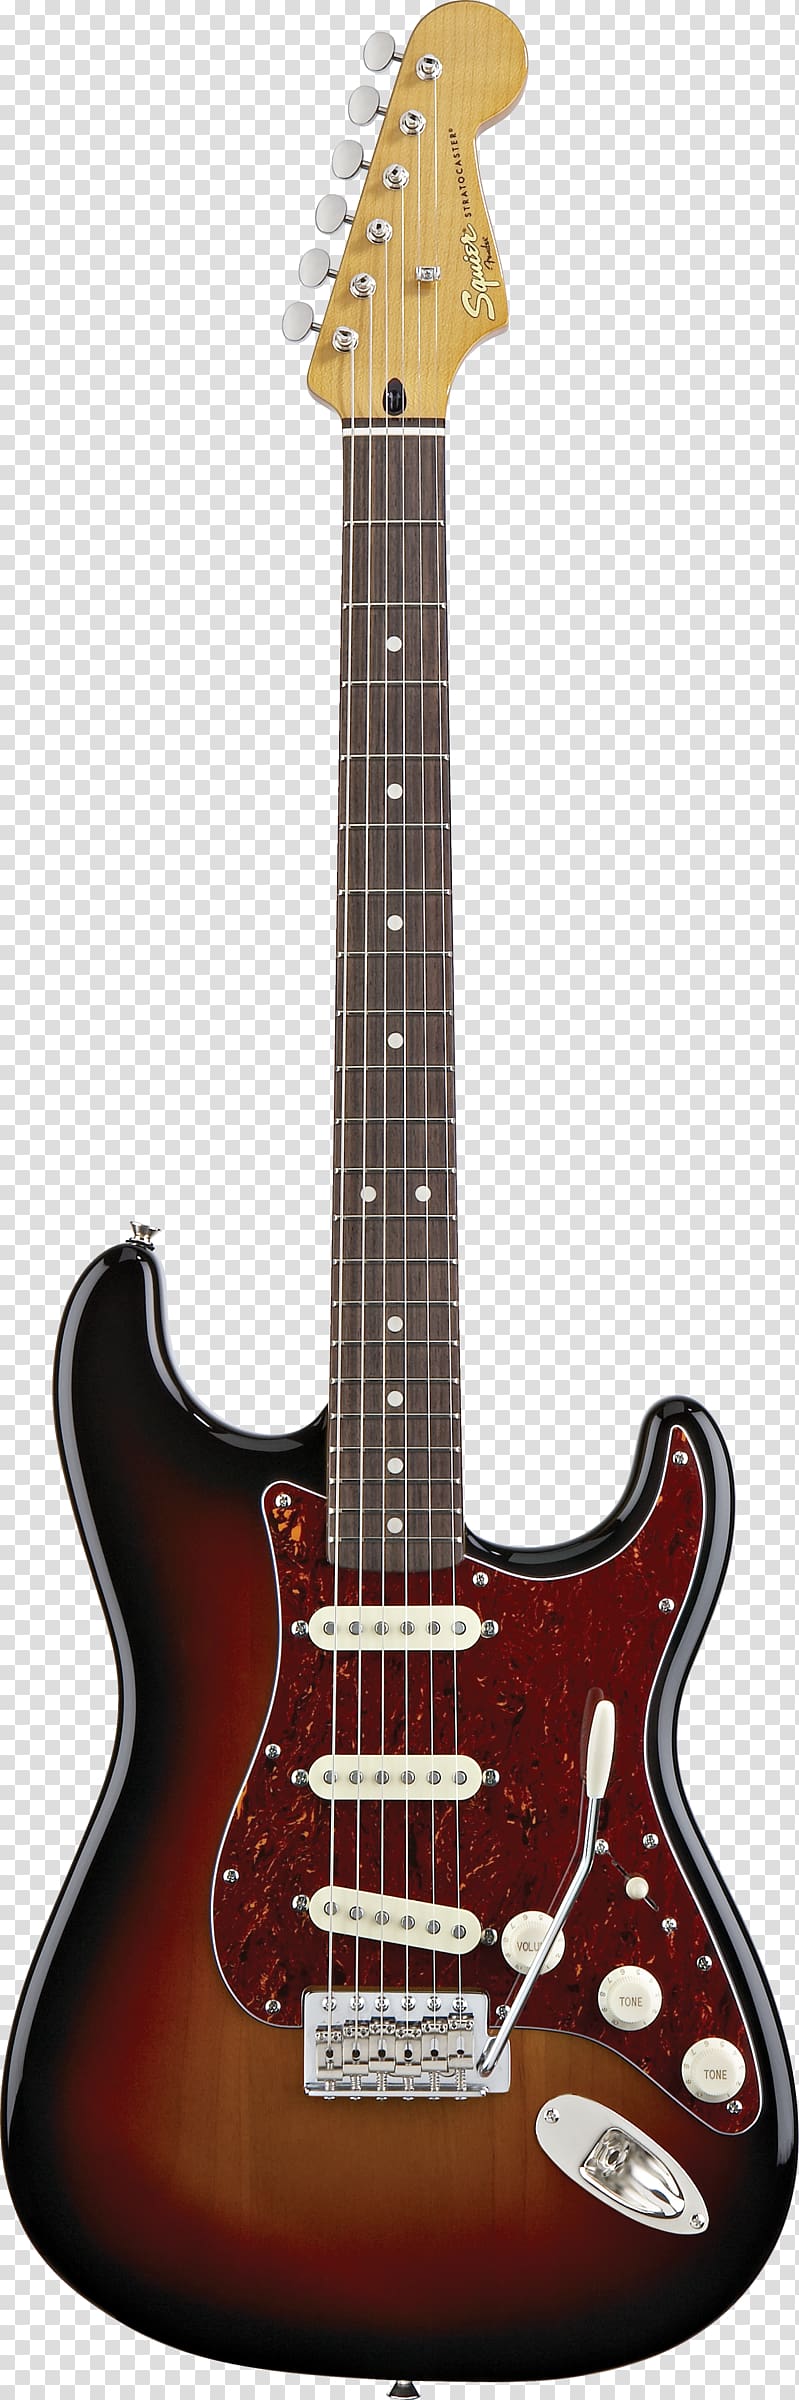 Squier Deluxe Hot Rails Stratocaster Fender Stratocaster Electric guitar Fender Musical Instruments Corporation, electric guitar transparent background PNG clipart